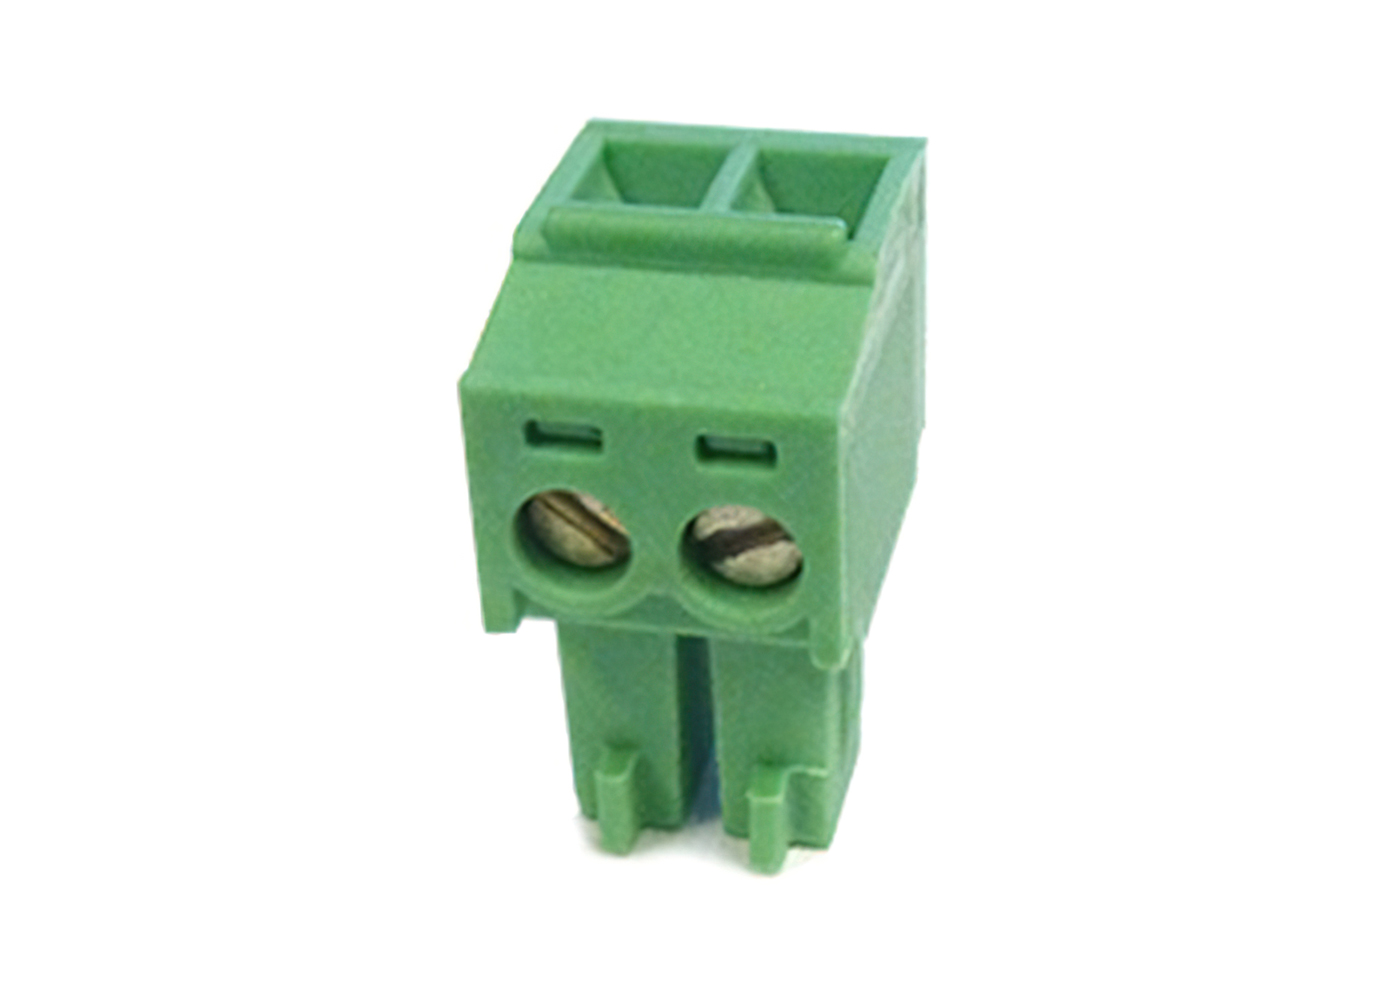 2 Position I/O Connector<br/>

<span class="clsSpnProdMdls">For HMI +PLC (HMCs) Only</span>